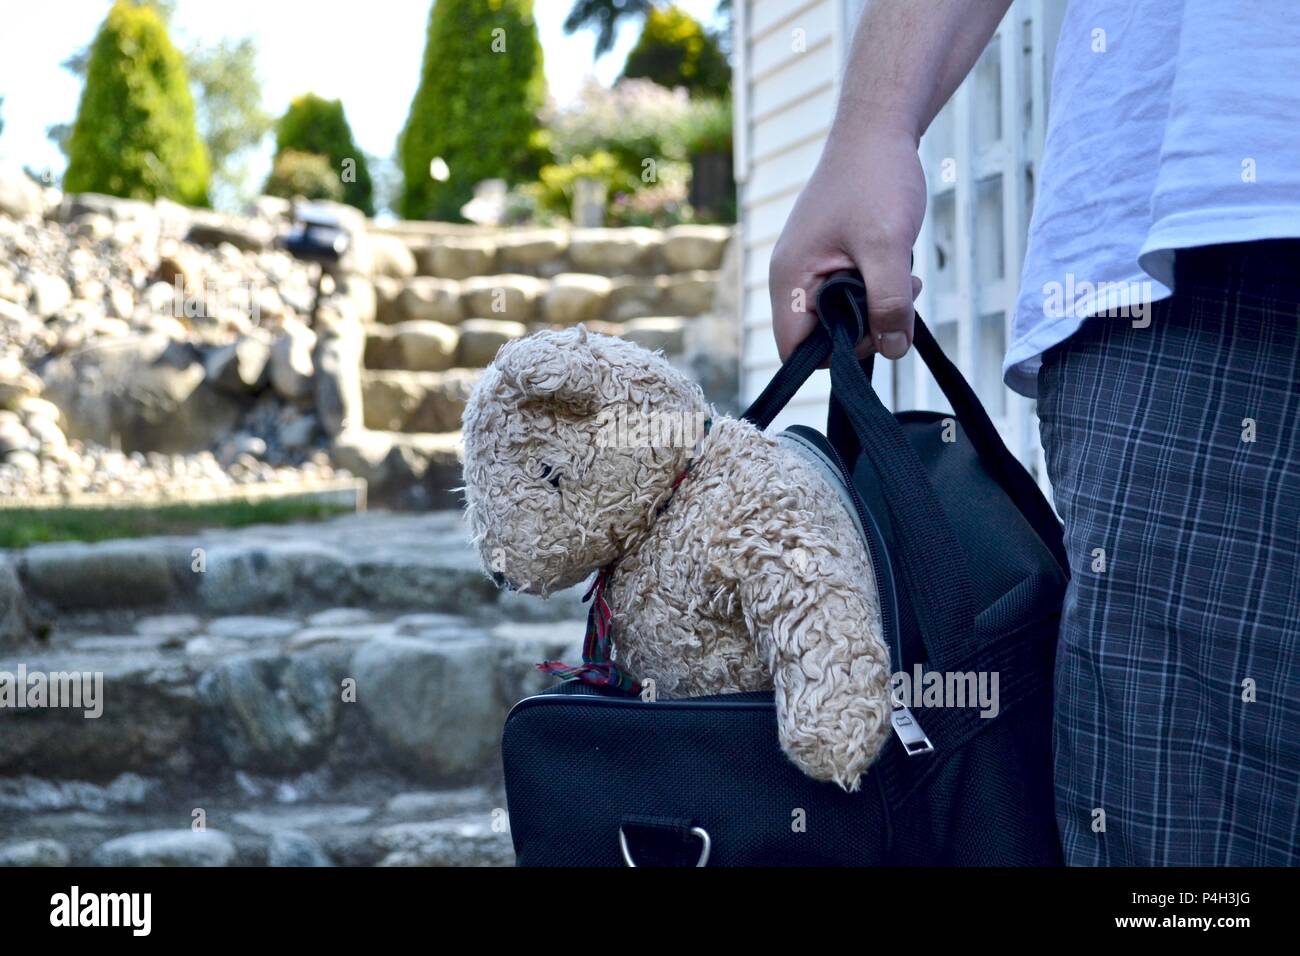 Well loved stuffed teddy bear sticking out of travel carry on bag carried by young adult caucasian male Stock Photo